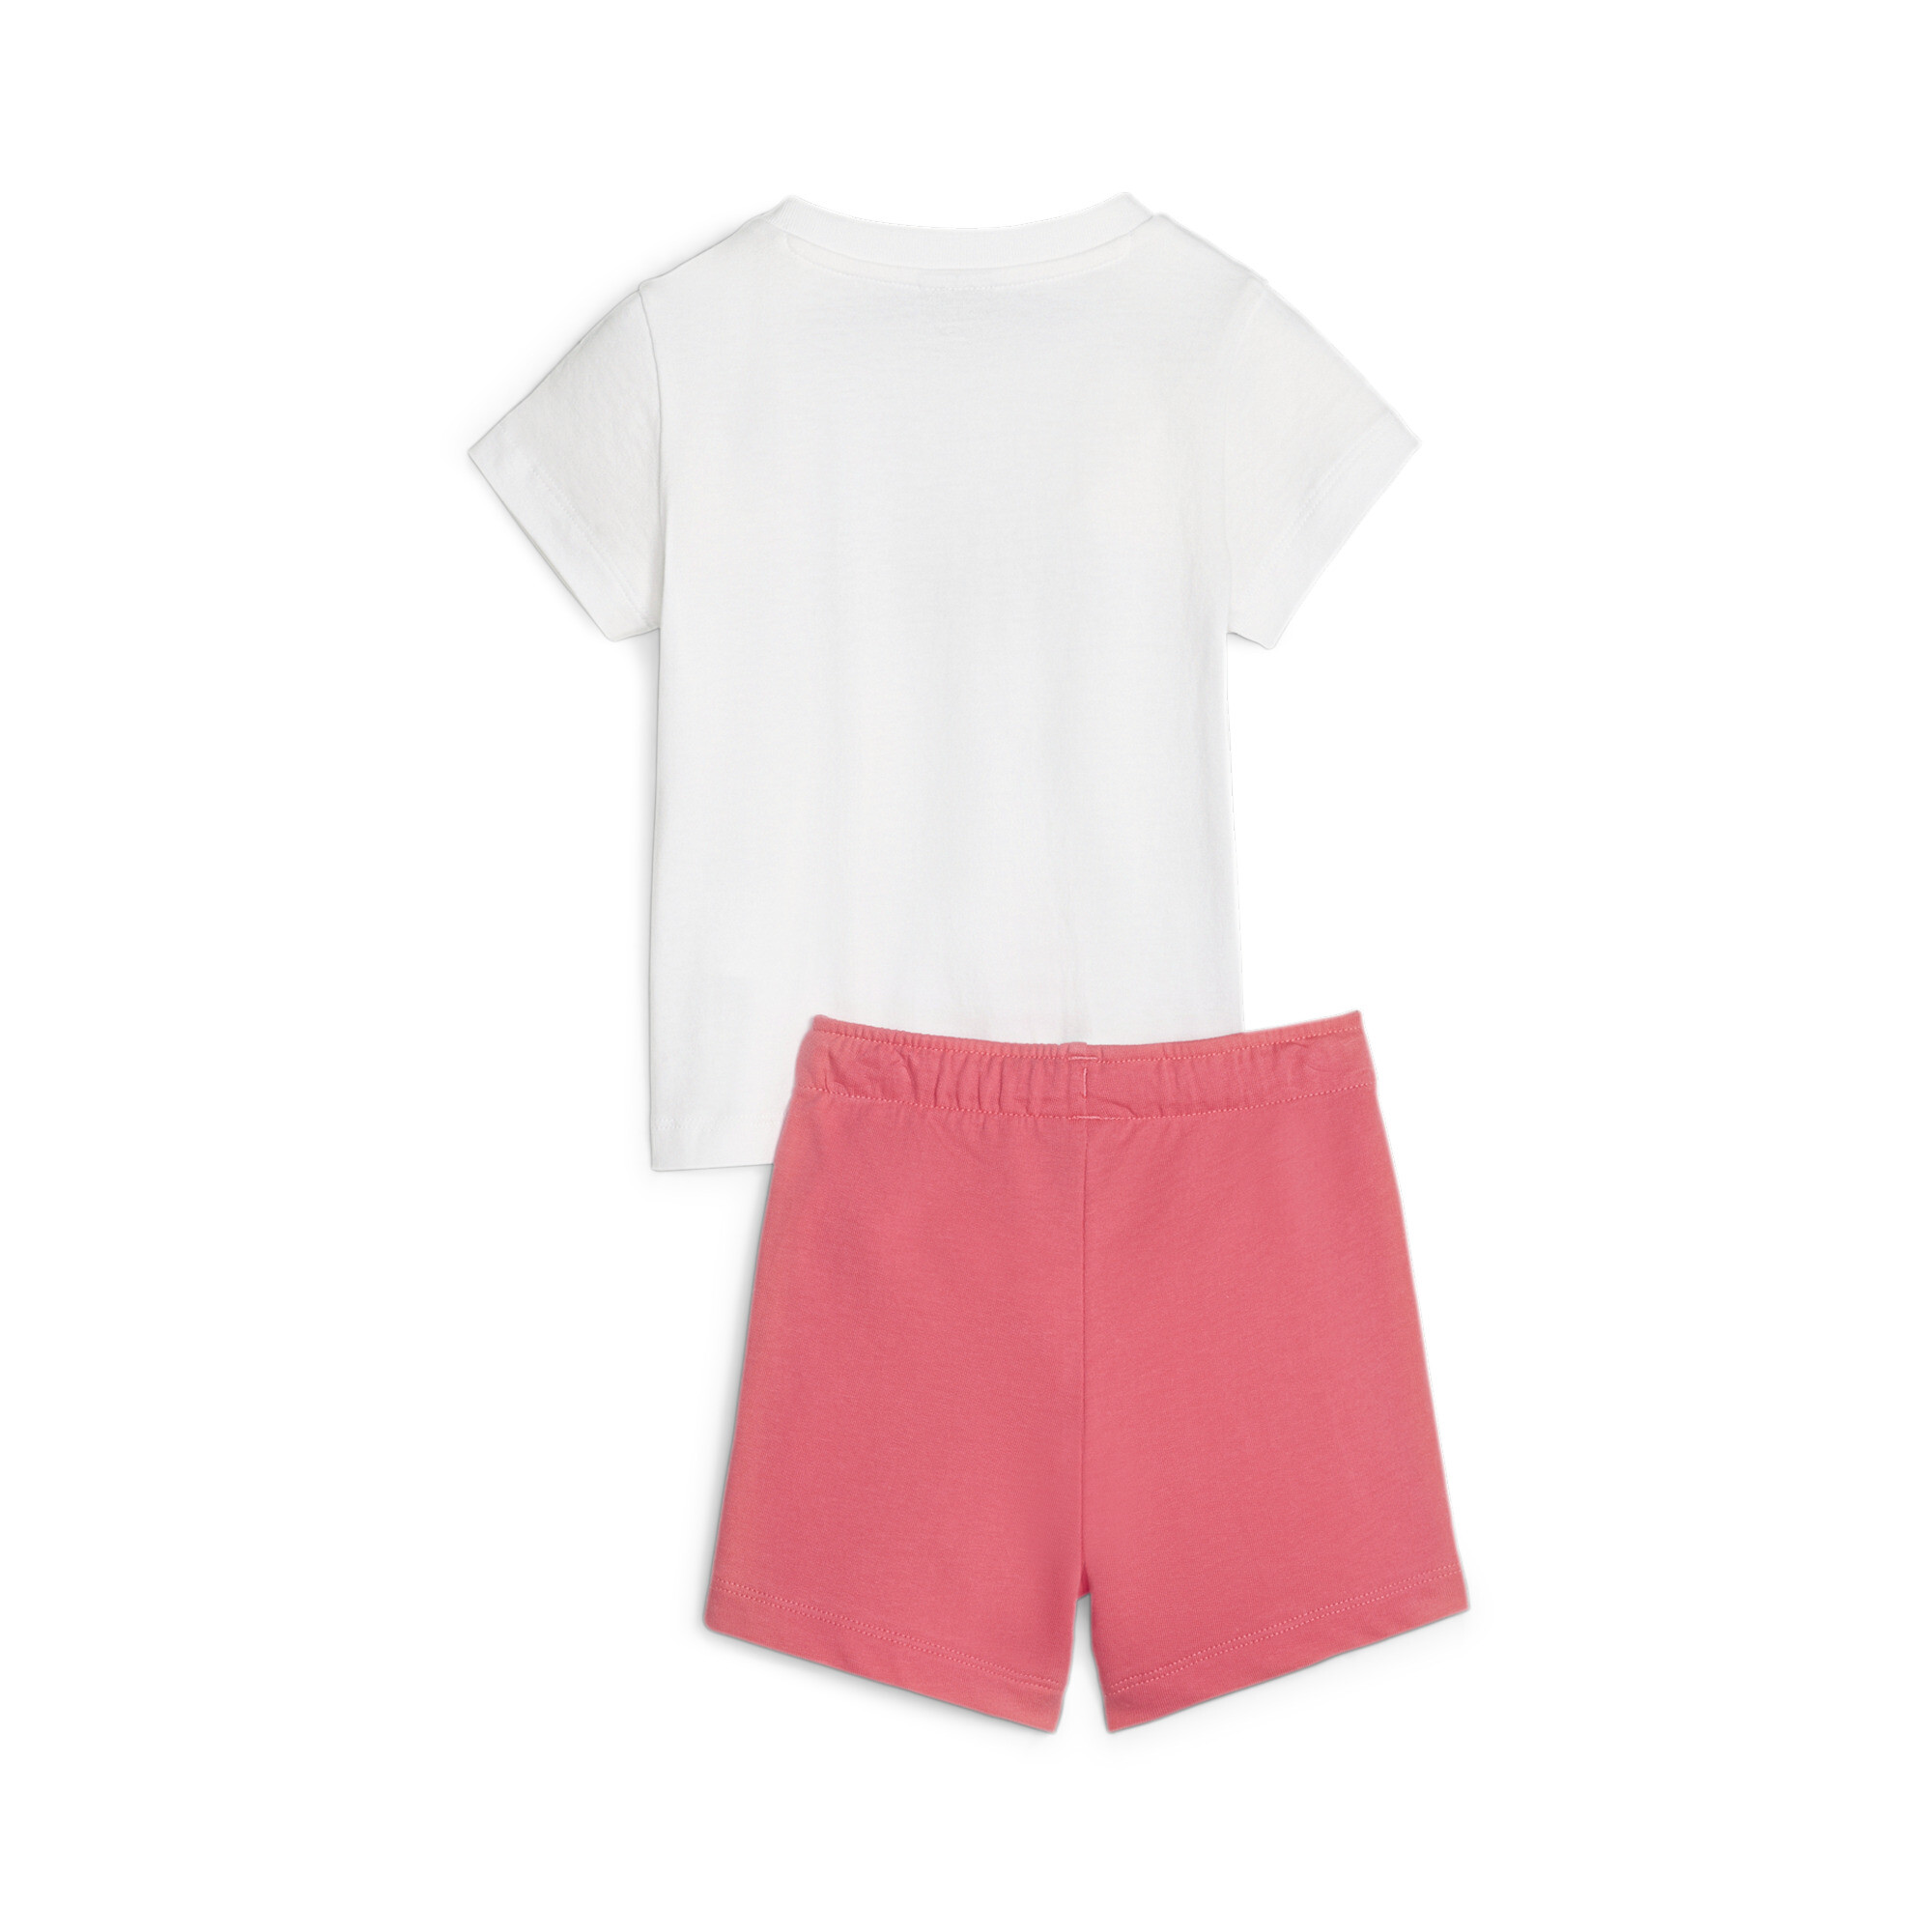 PUMA Minicats T-Shirt And Shorts Babies' Set In Pink, Size 4-6 Months